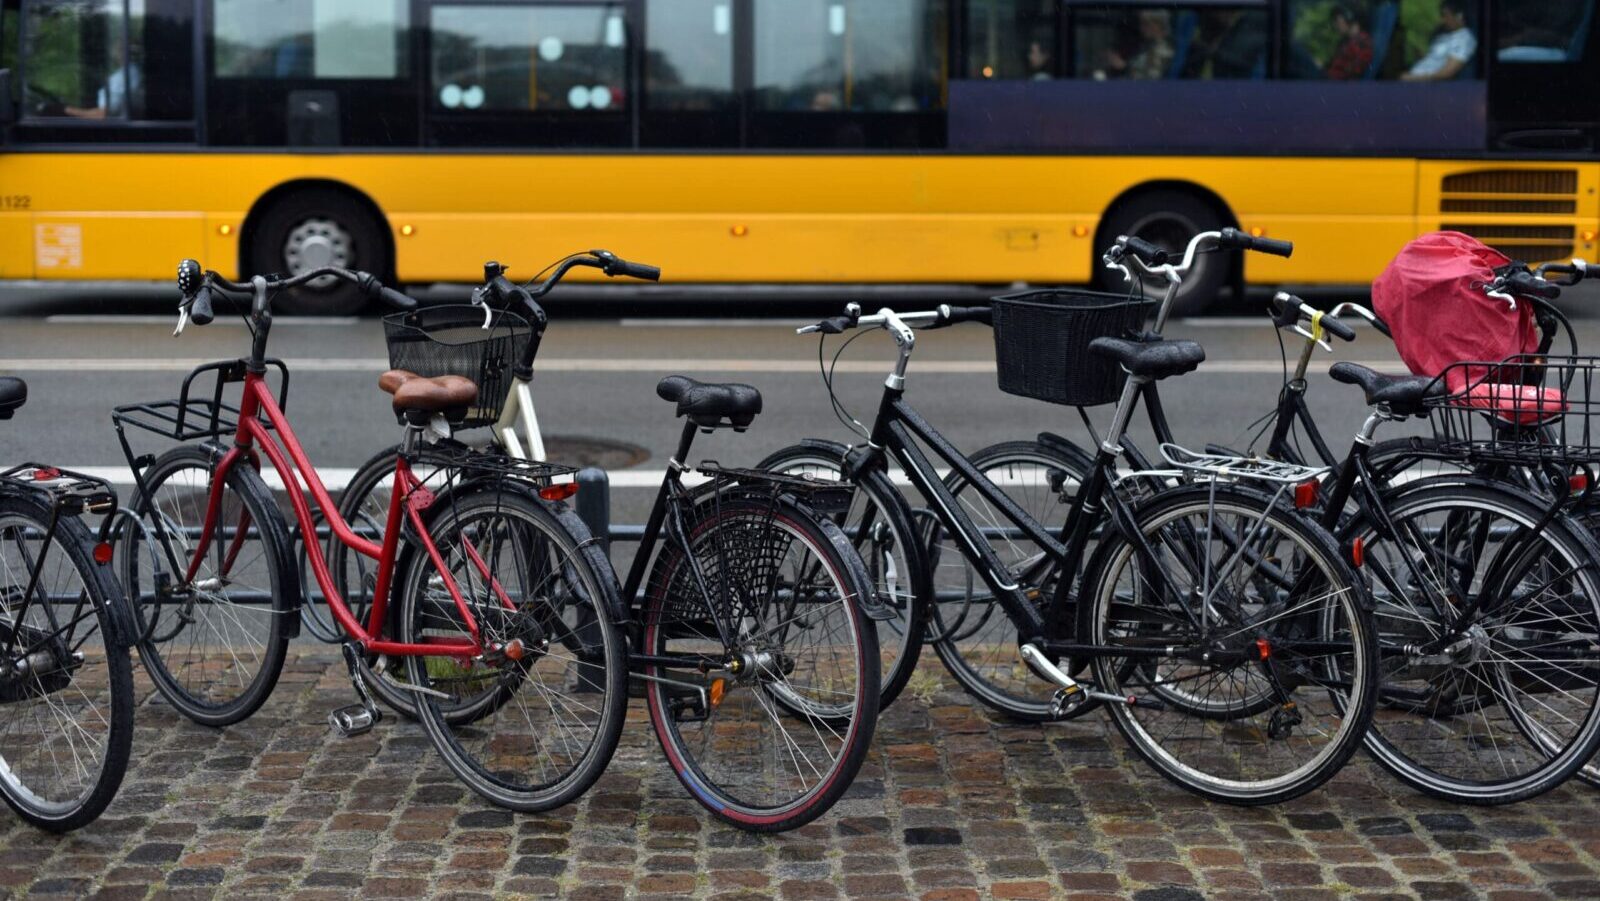 Parking,With,Bicycles,On,Background,Public,City,Transport